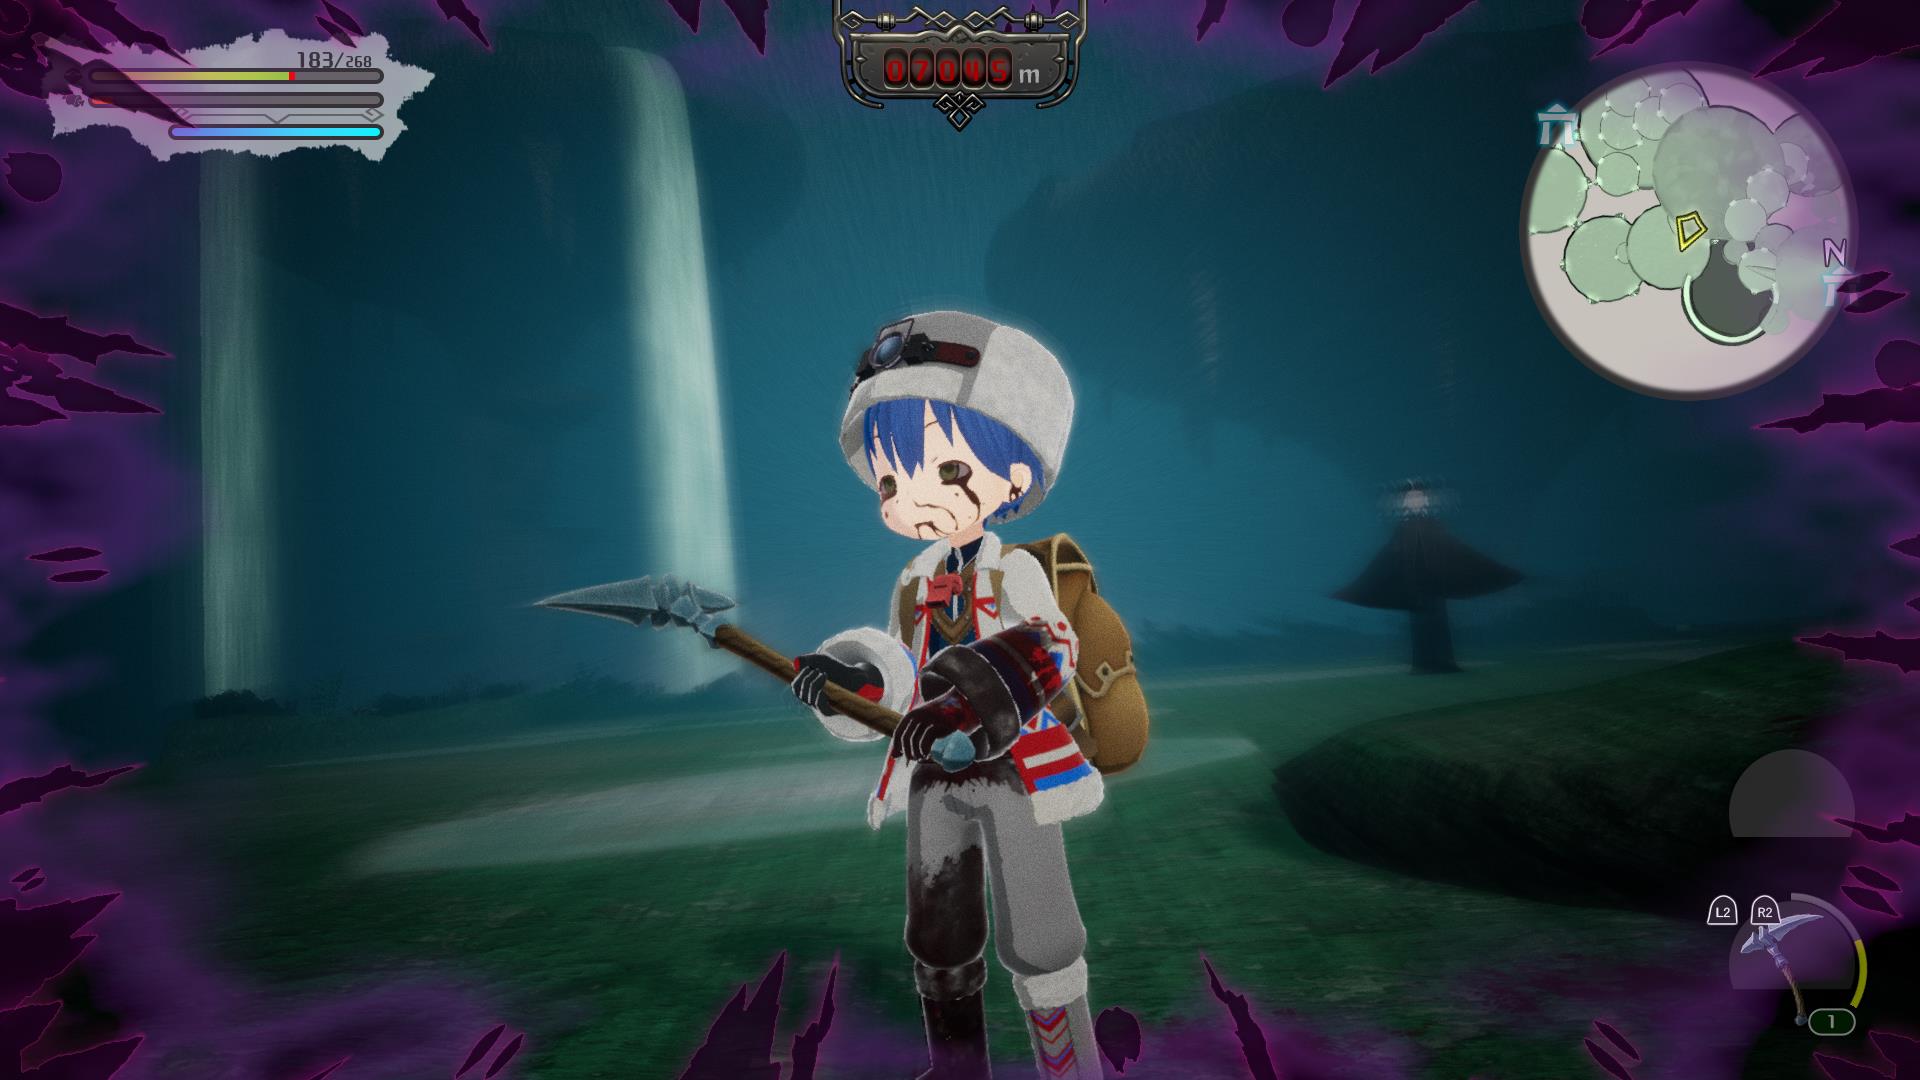 Made in Abyss: Binary Star Falling into Darkness details Deep in Abyss  Mode